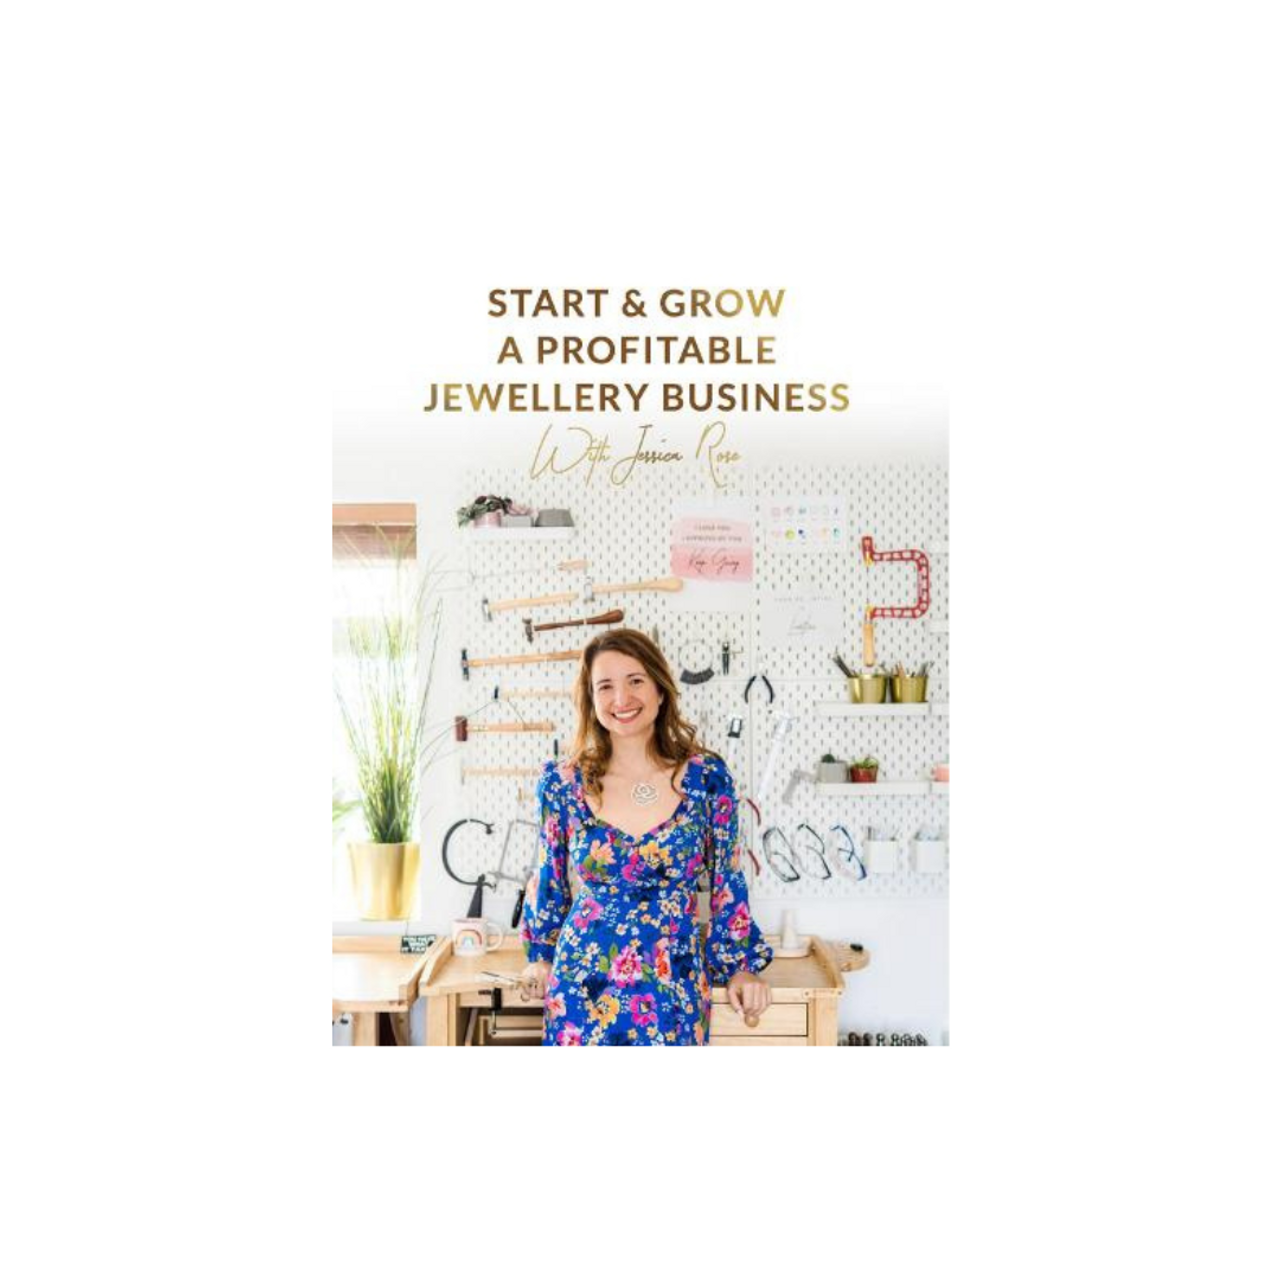 "Start & Grow a Profitable Jewellery Business" Book by Jessica Rose